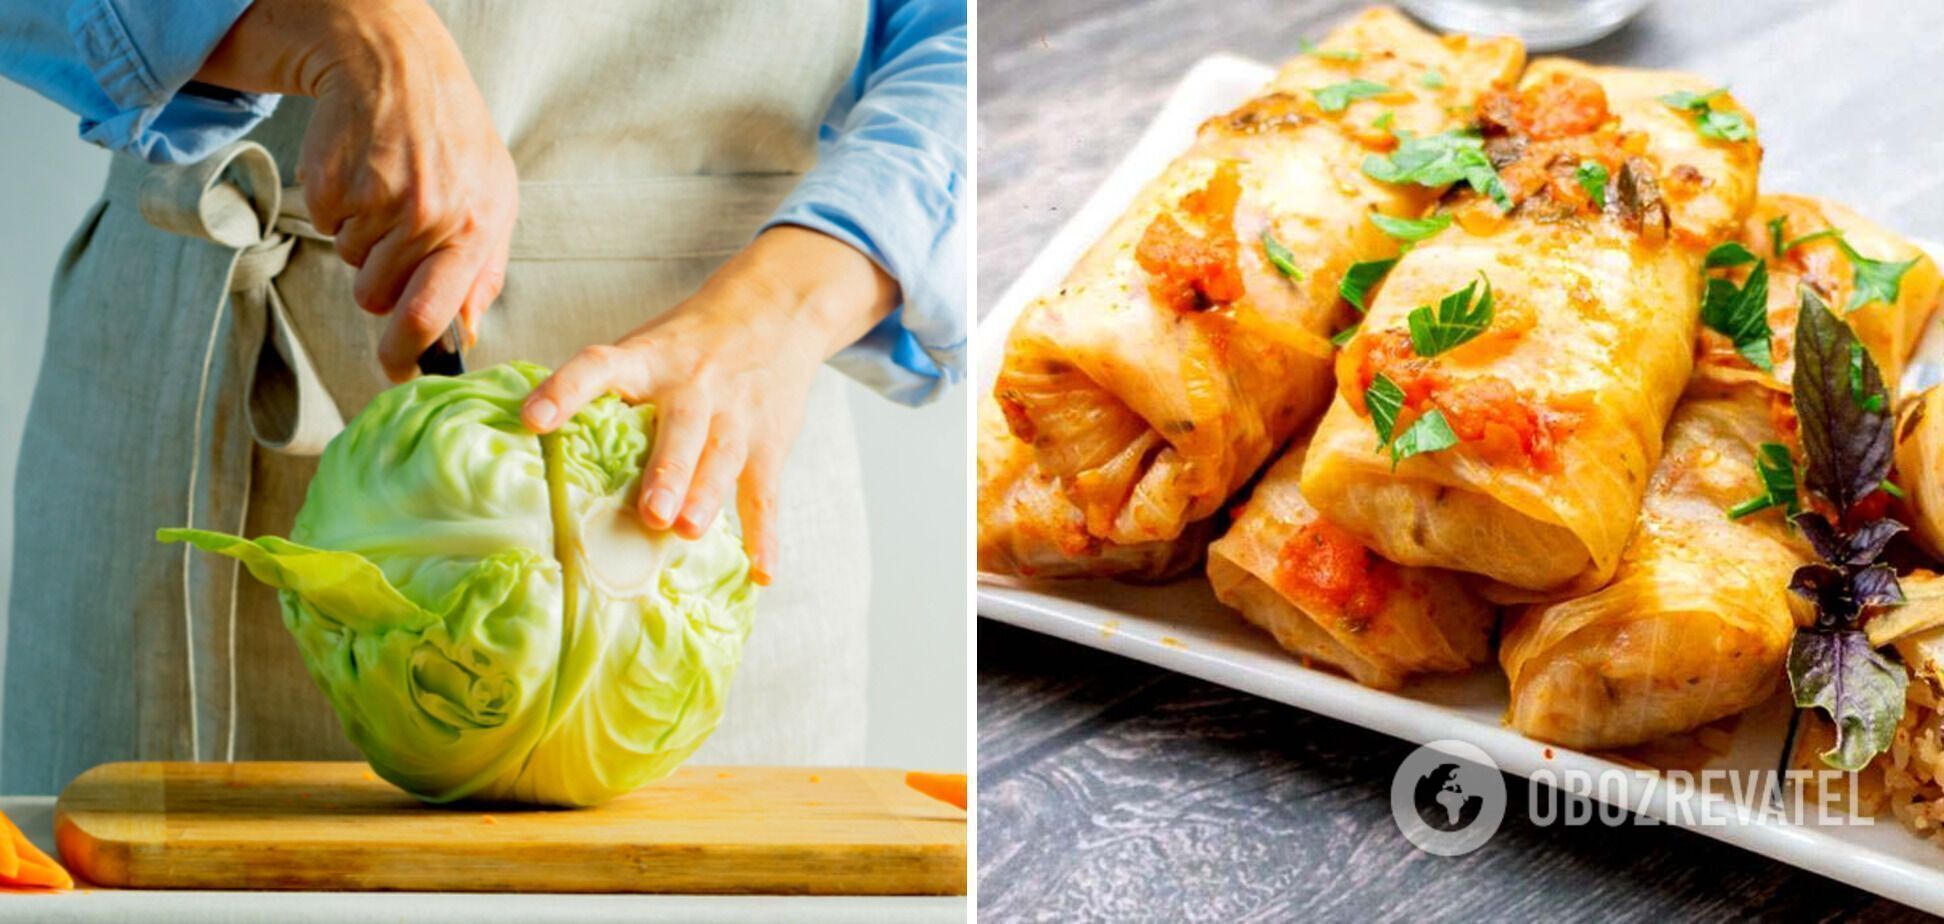 How to steam cabbage for stuffed cabbage in 7 minutes